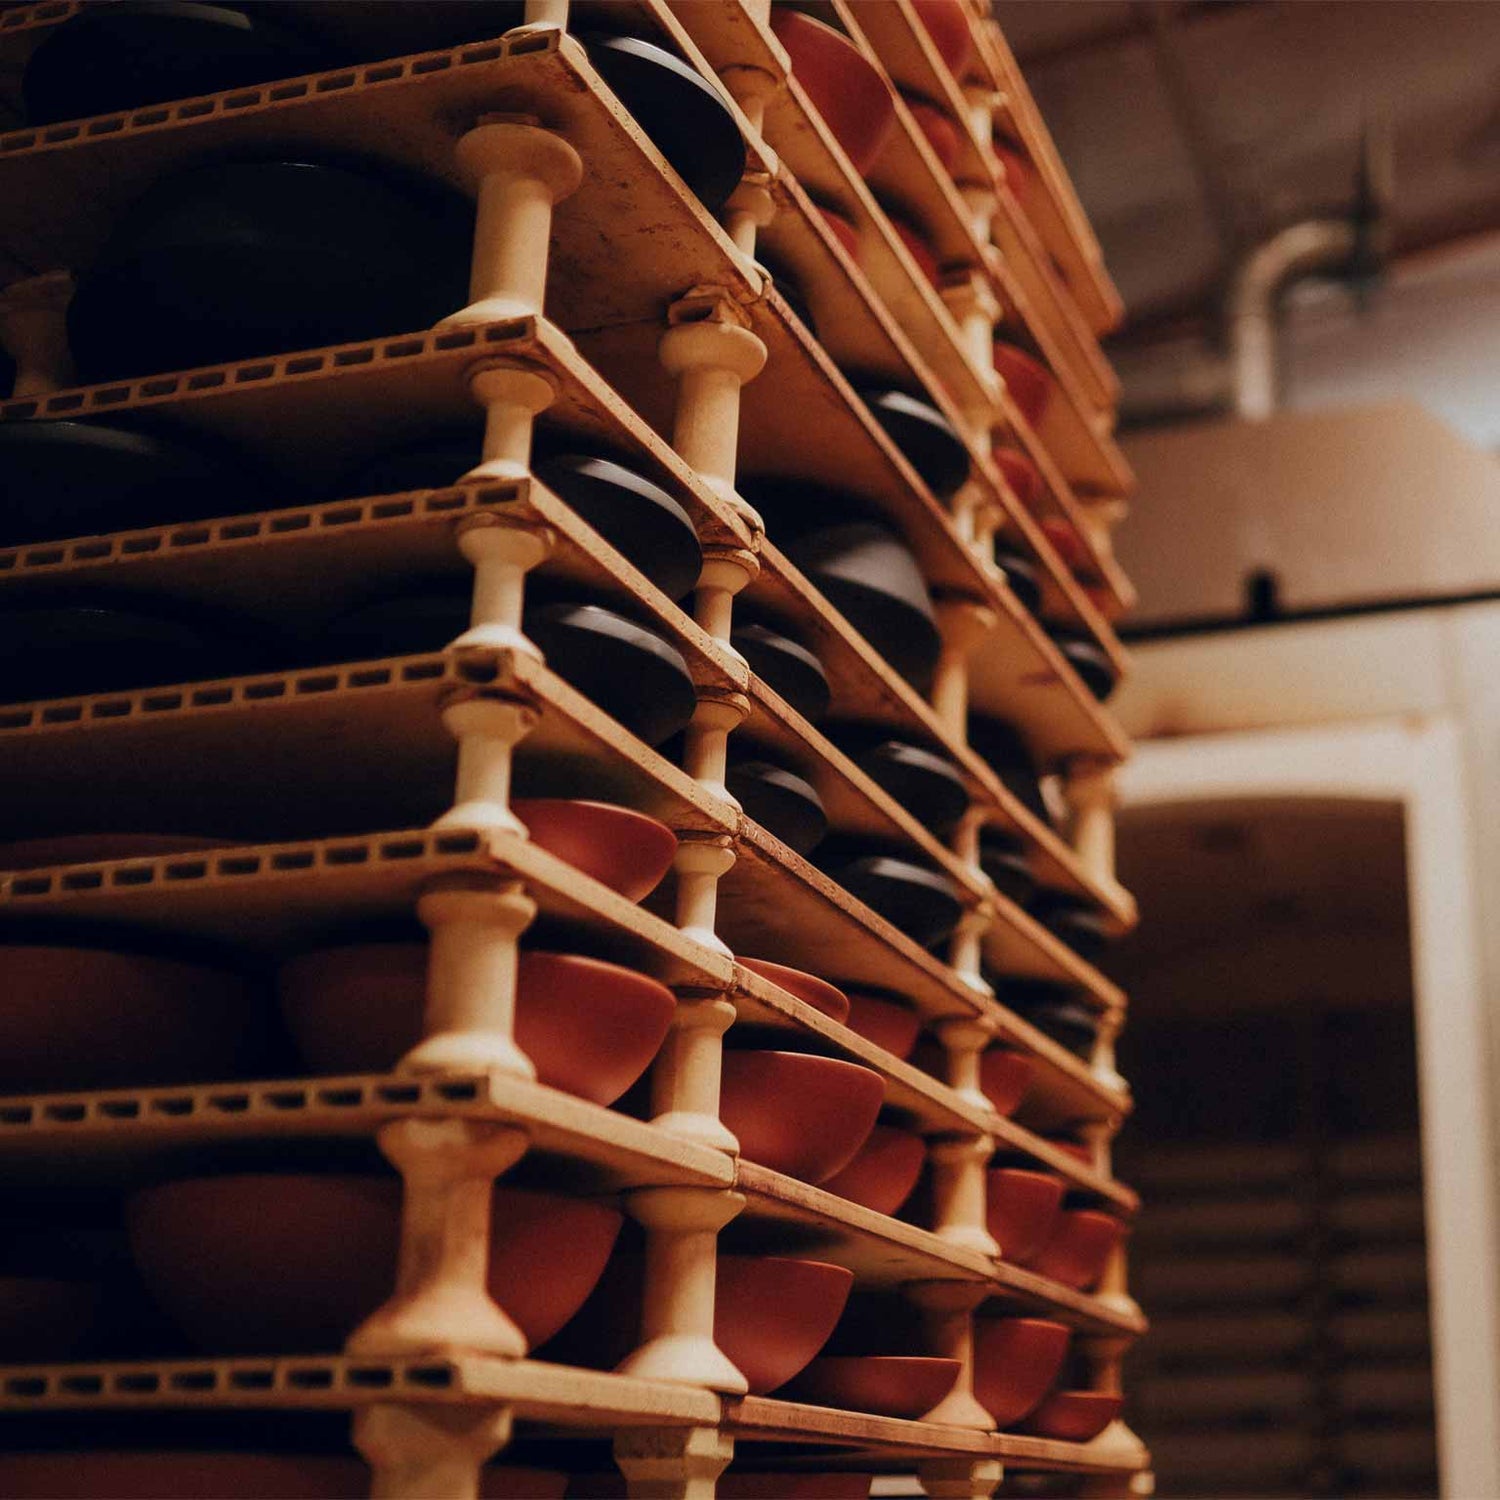 Neatly stacked clay pots and bowls before going into the oven